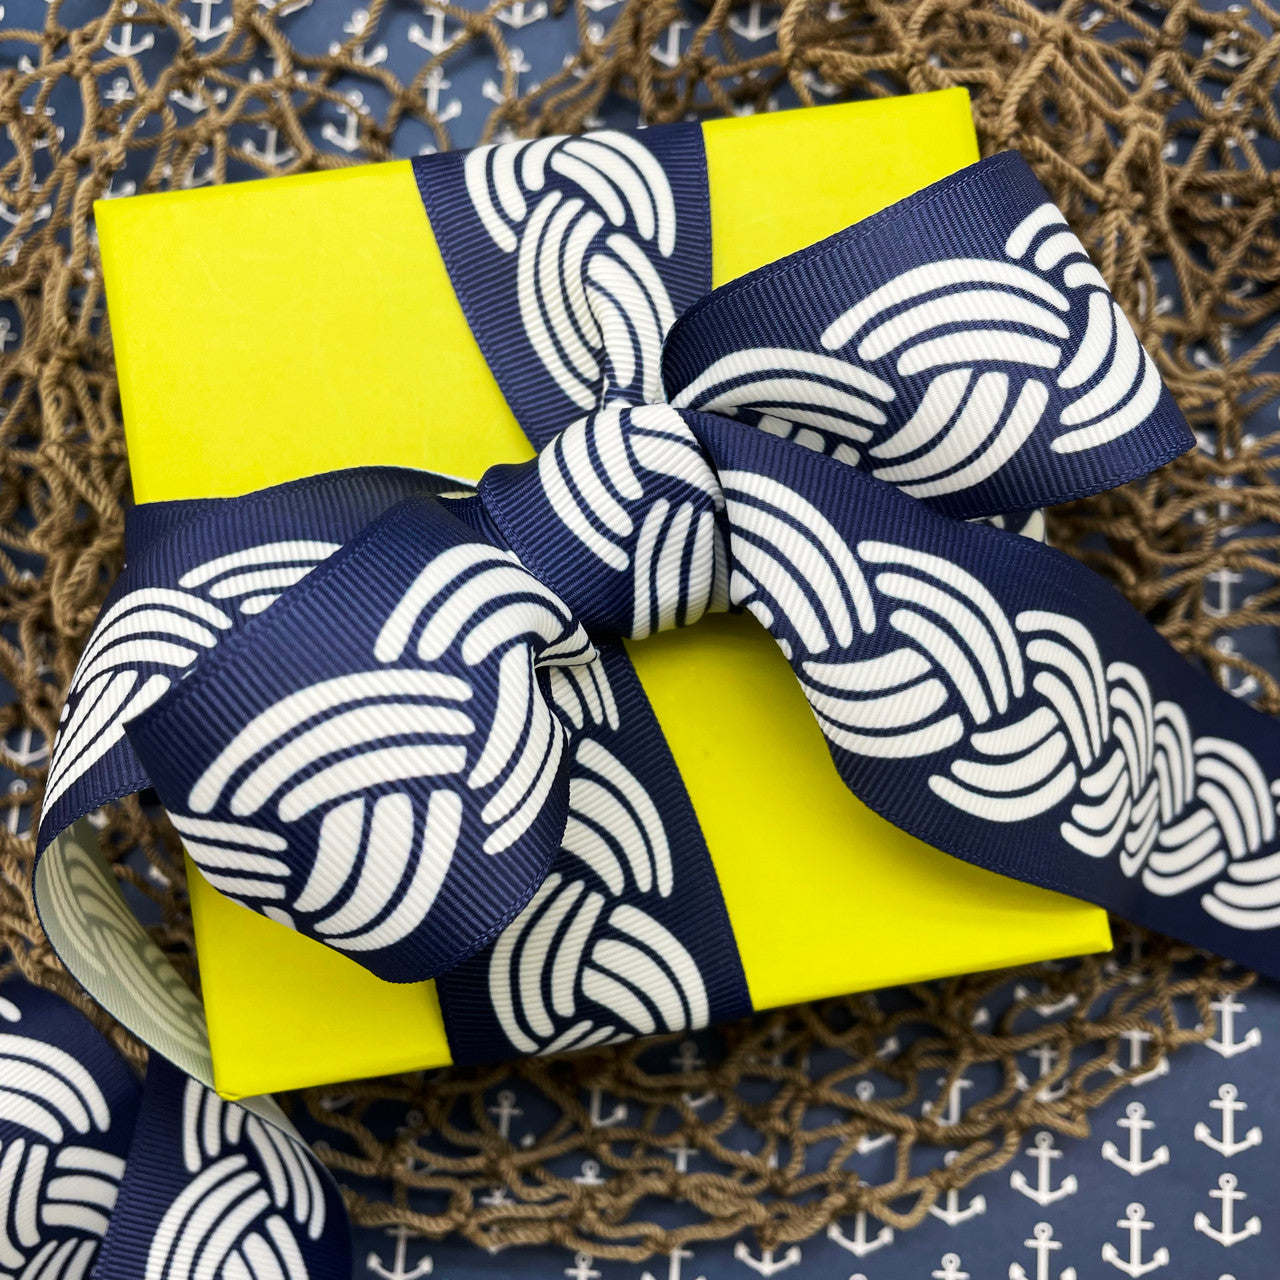 Our nautical rope ribbon ties a perfect bow for gifts wrap, gift baskets, wreaths and party decor too!